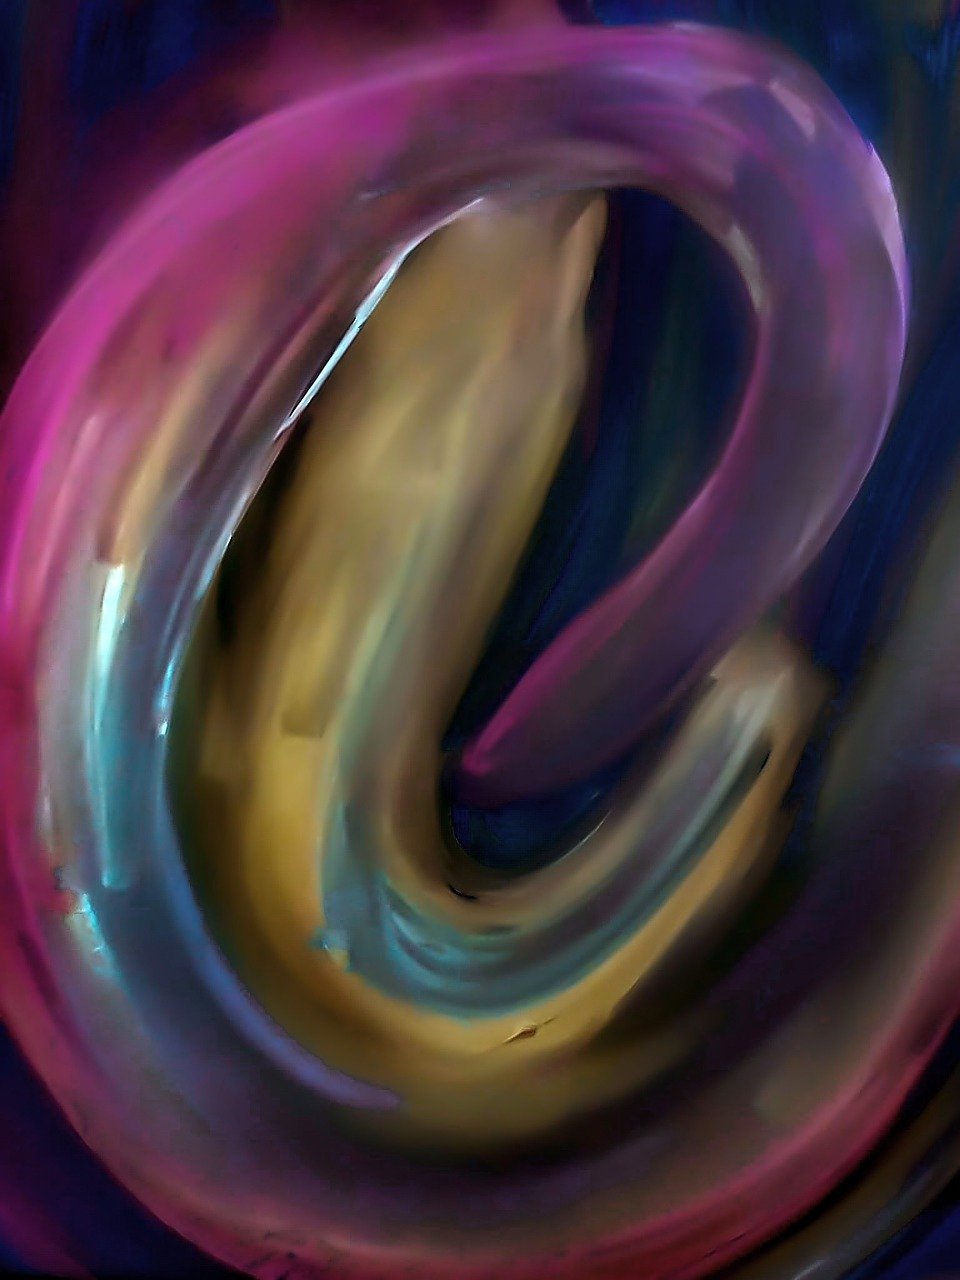 a close up of a painting of a swirl, a digital painting, flickr, phone wallpaper, magenta and blue, heavy jpeg artifact blurry, muted rainbow tubing